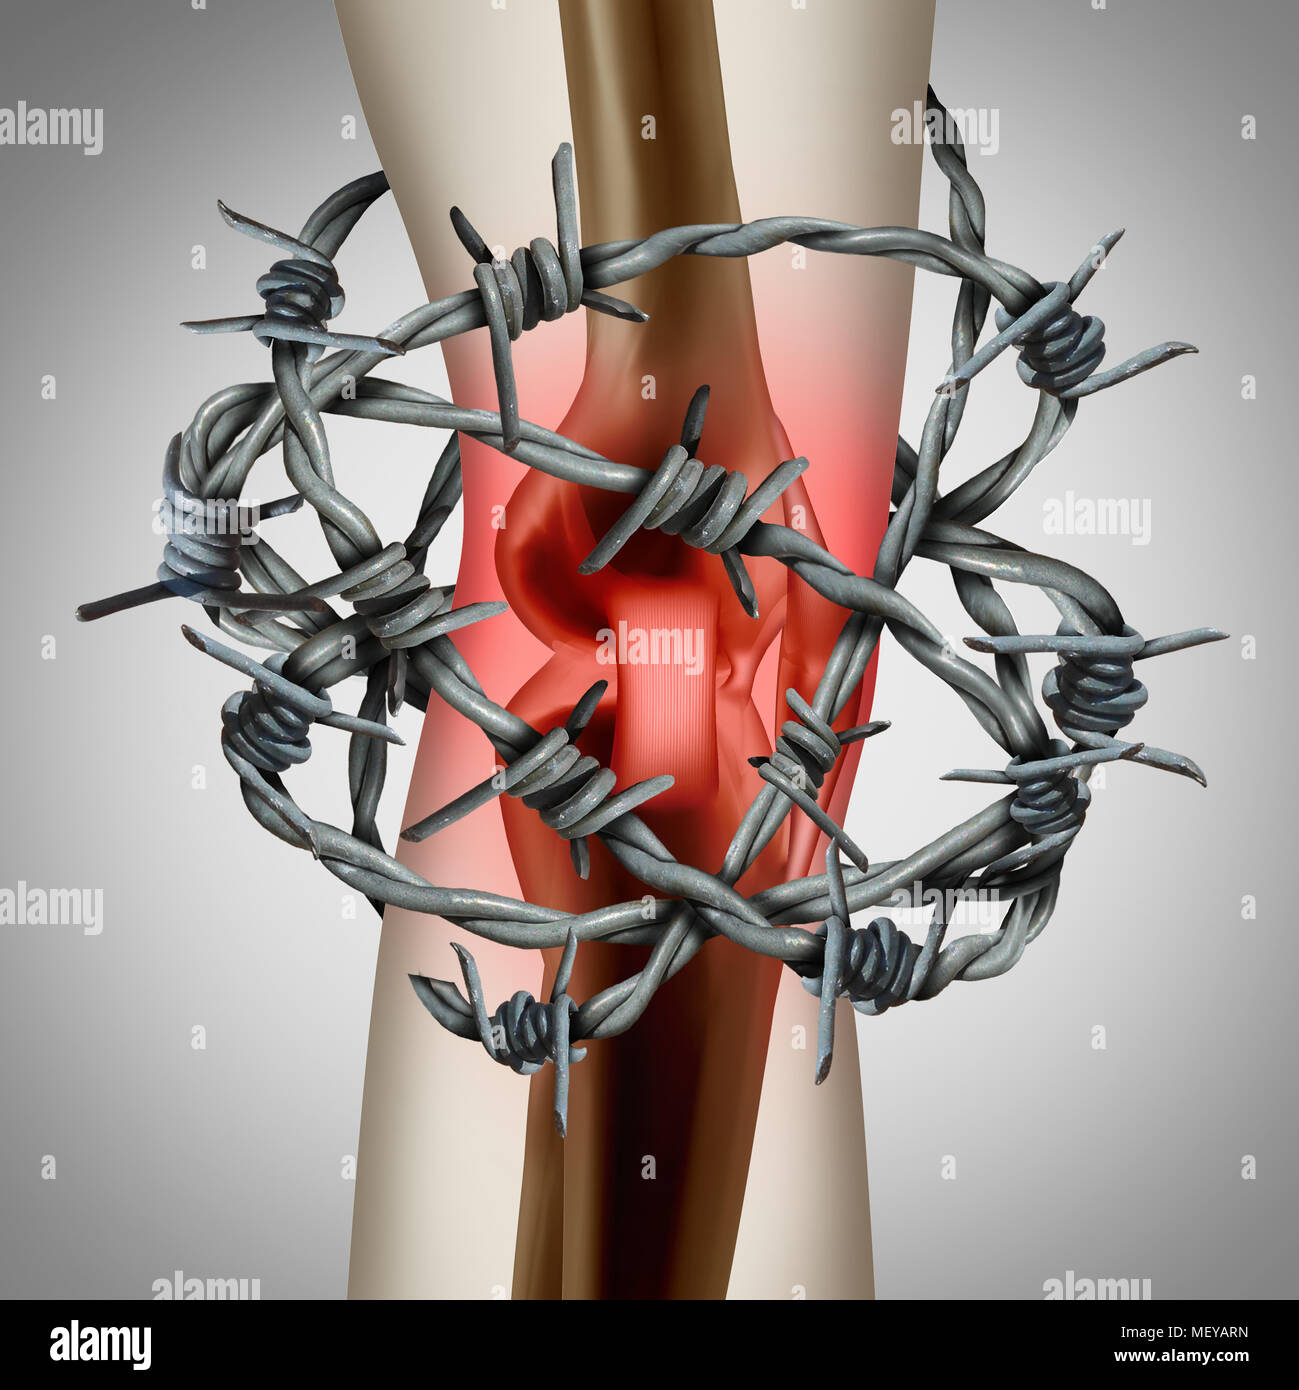 Knee pain and painful joint as a medical illustration of a human skeleton showing a sports injury or a physical accident with barbed wire. Stock Photo